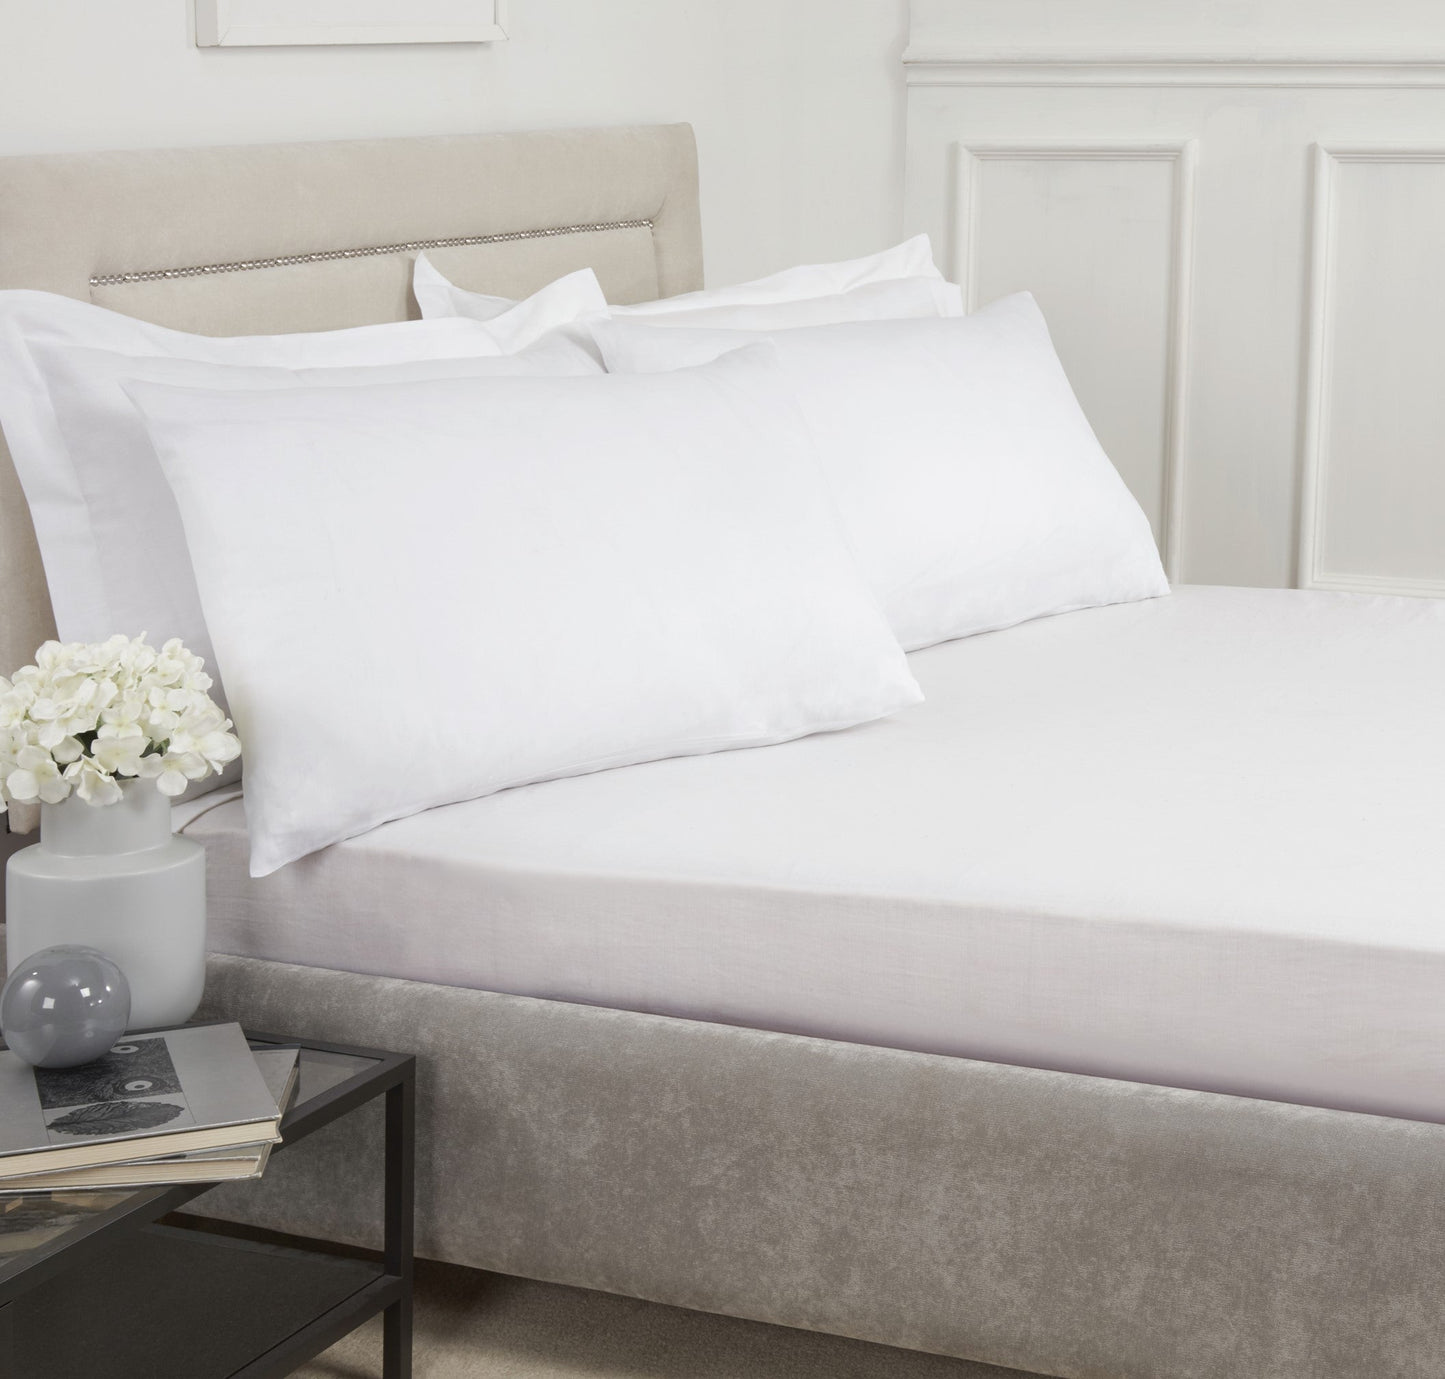 Lewis's 100% Cotton Fitted Bedding Range - White